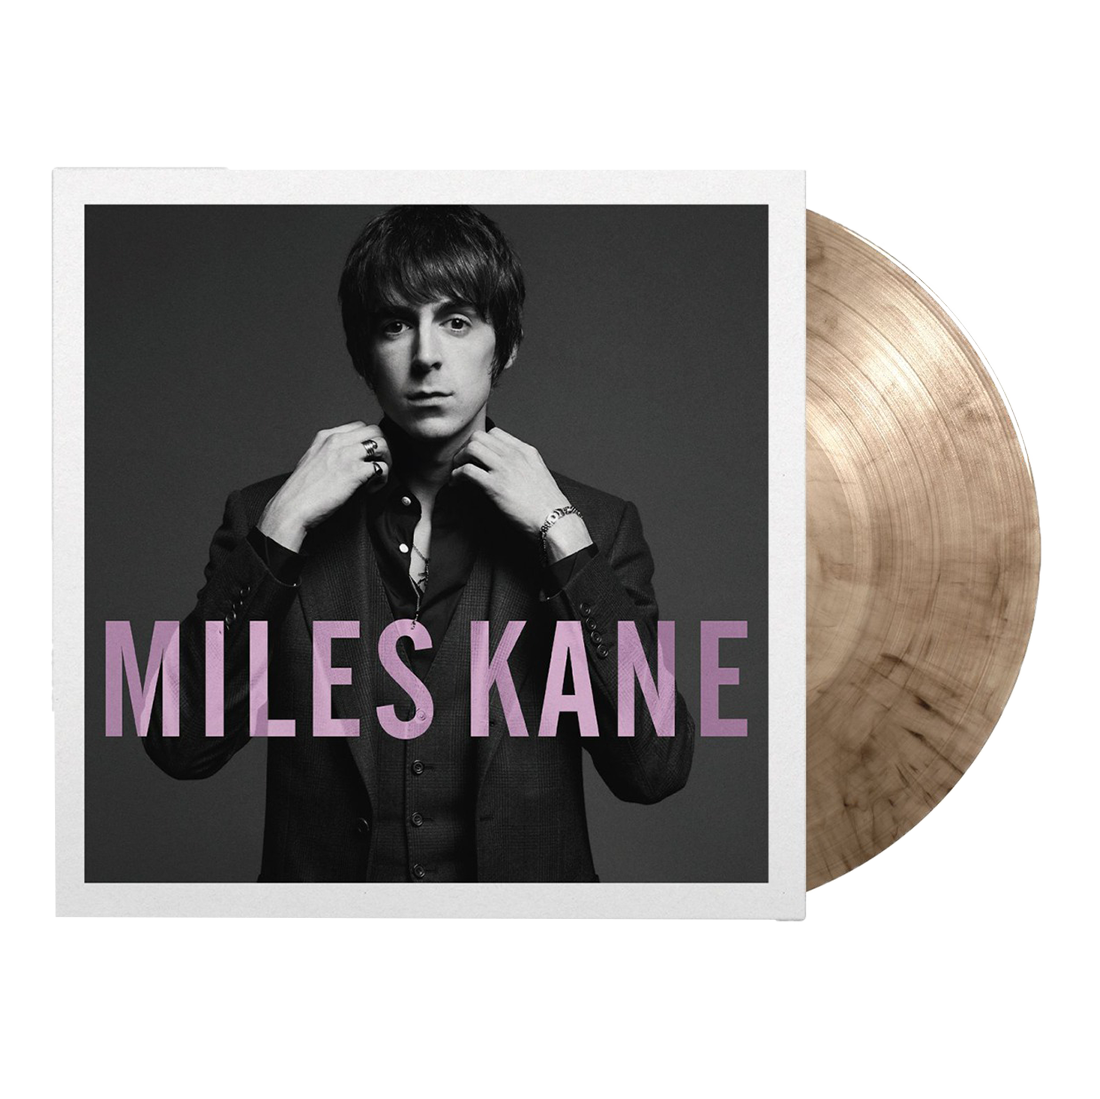 Miles Kane - Colour Of The Trap: Limited Edition Smoke Vinyl LP